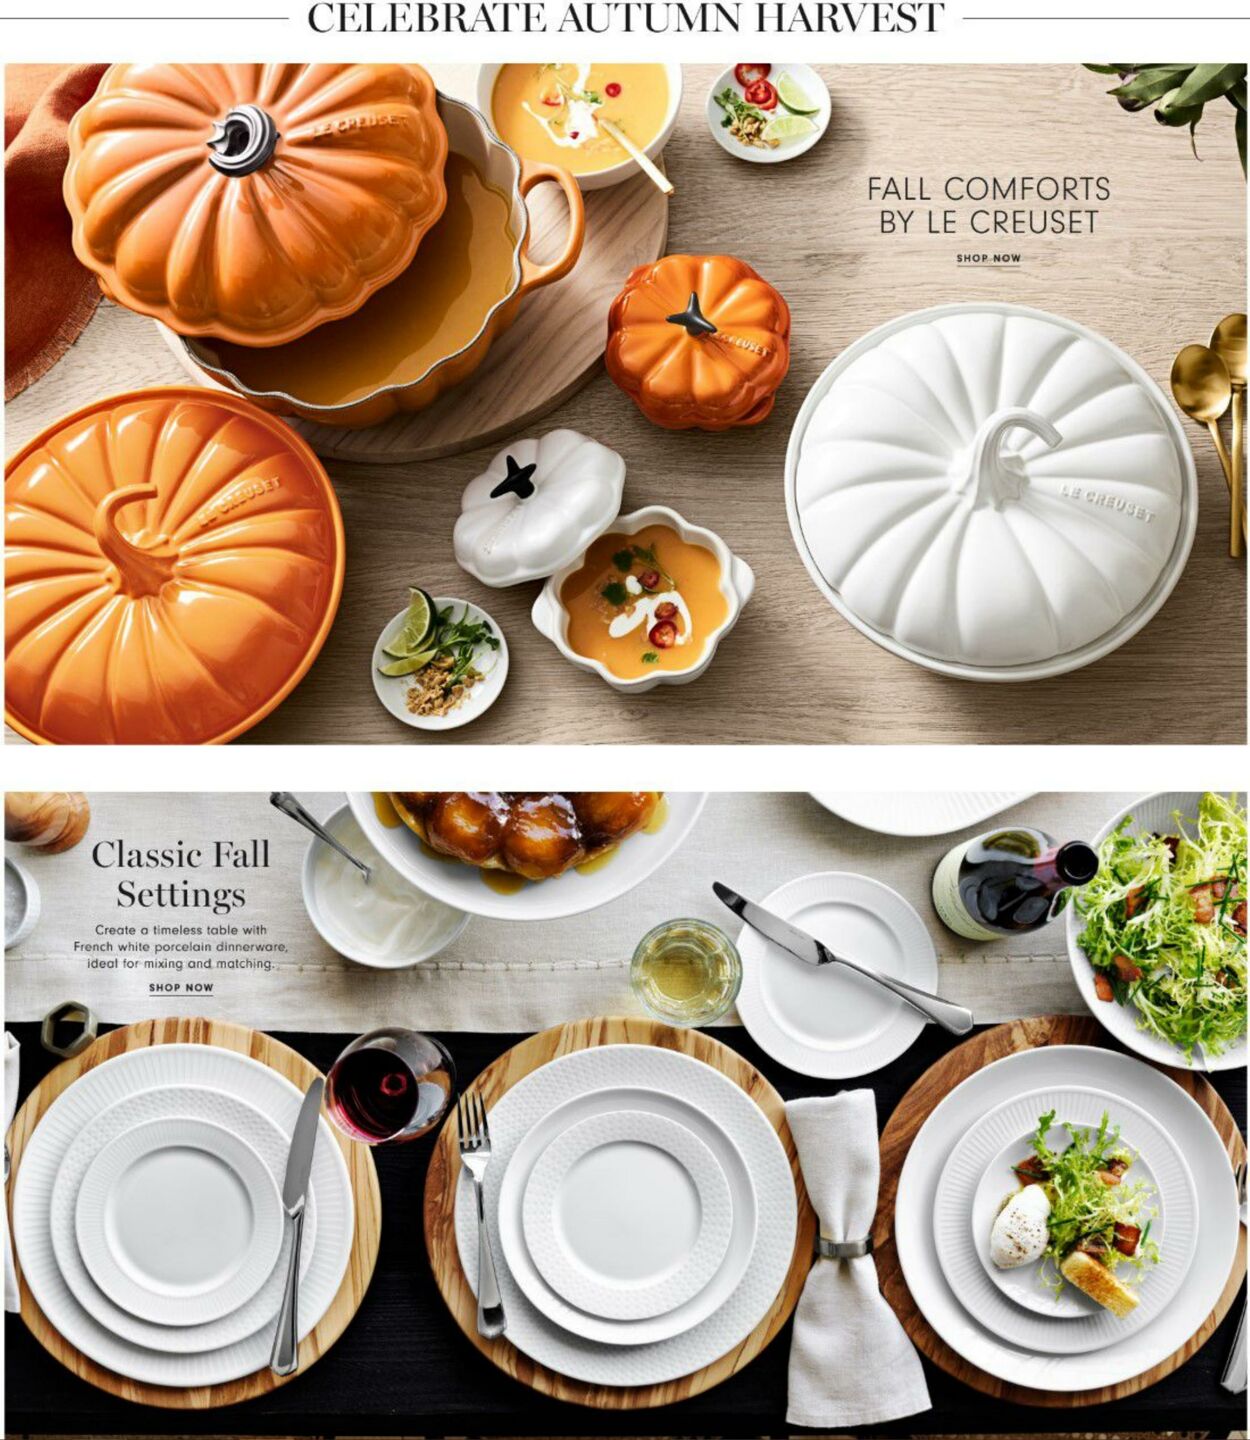 Williams Sonoma Promotional weekly ads